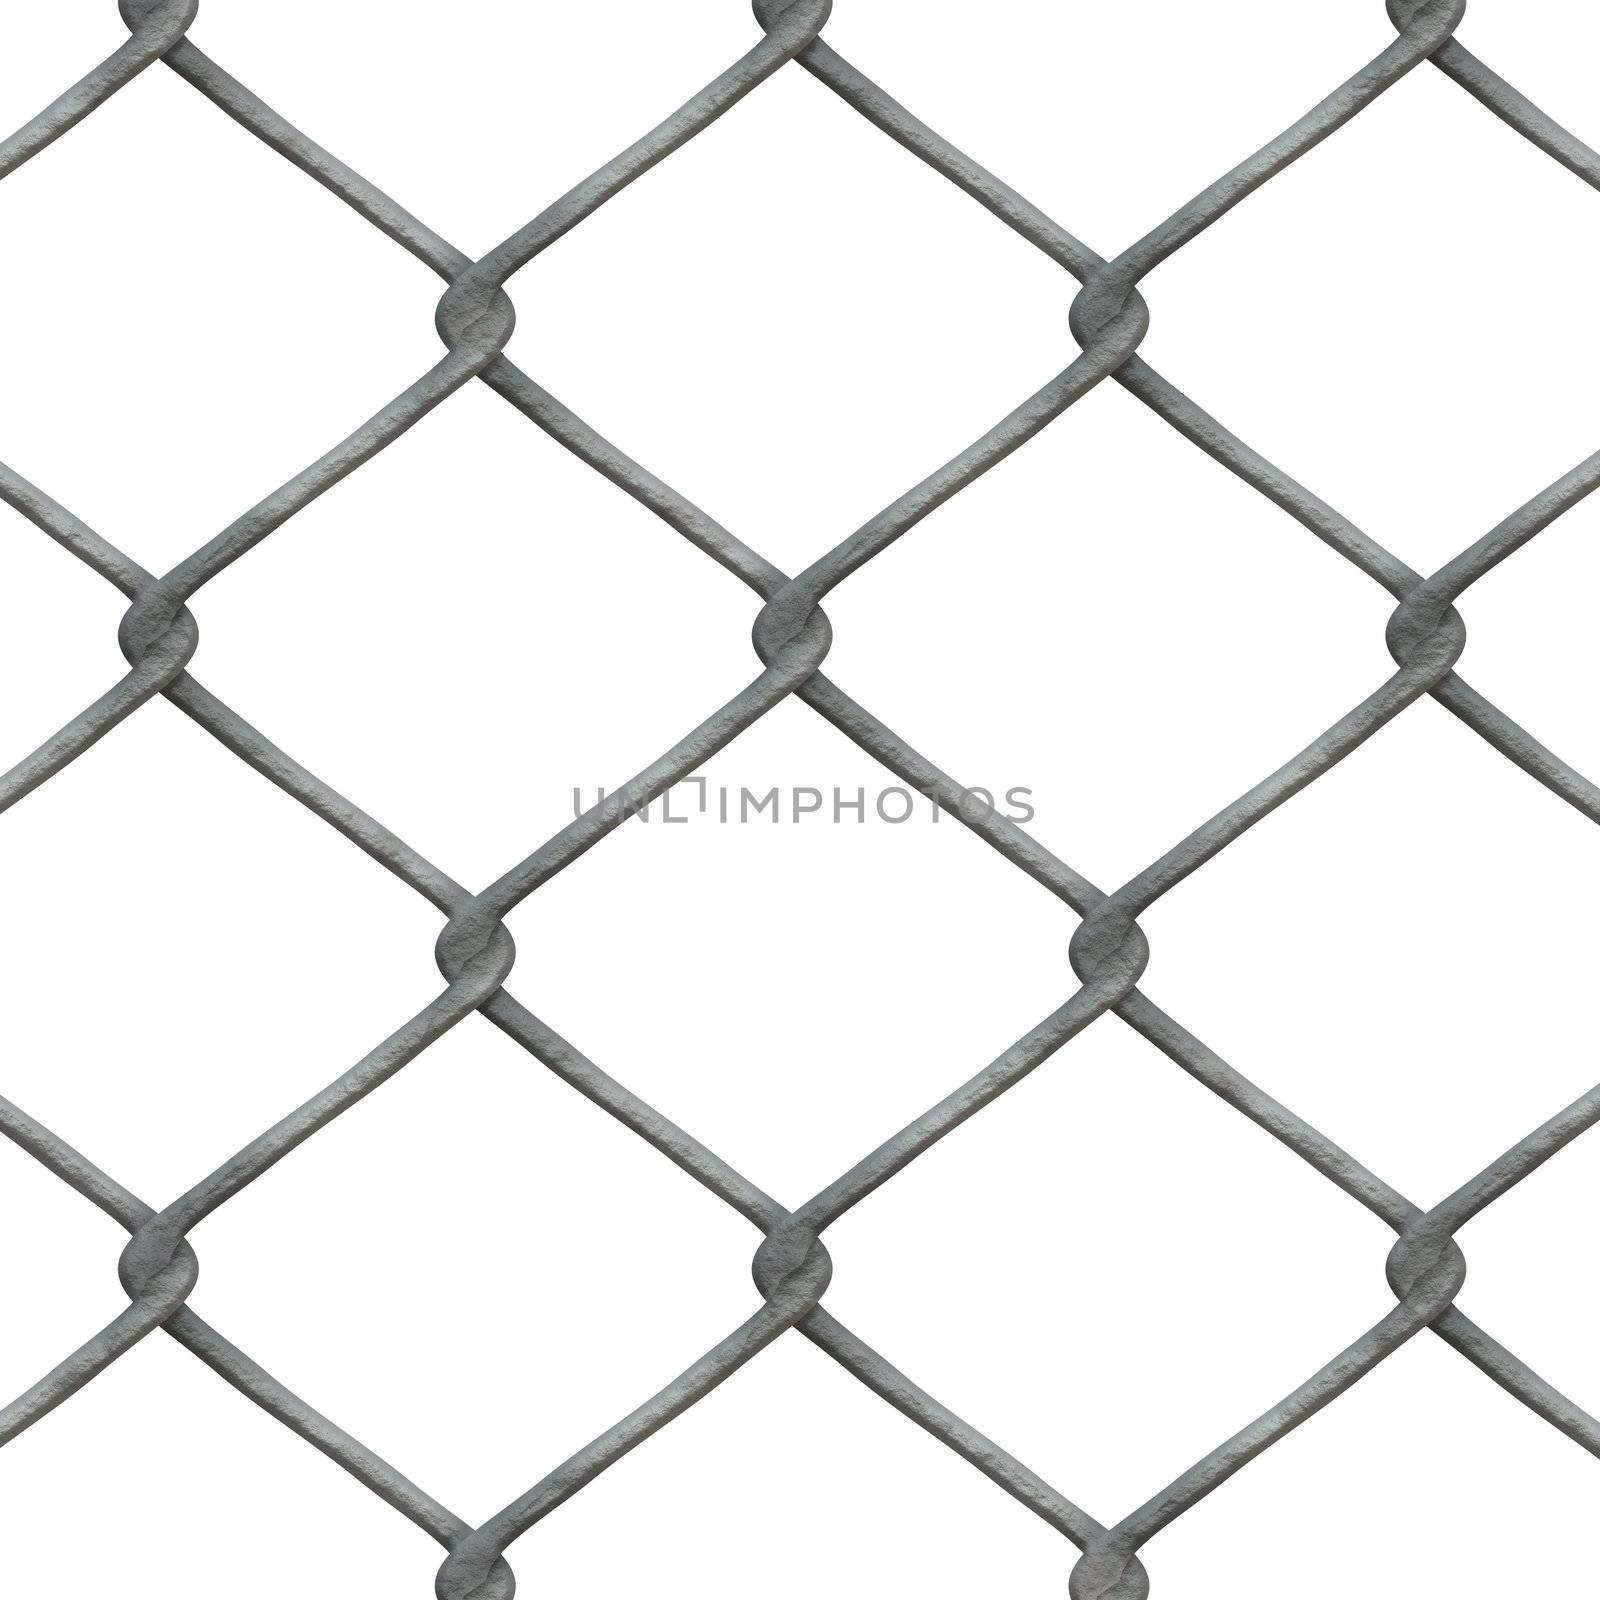 High-res chain link fence pattern- you can tile this image seamlessly, and apply it in both print and web design.